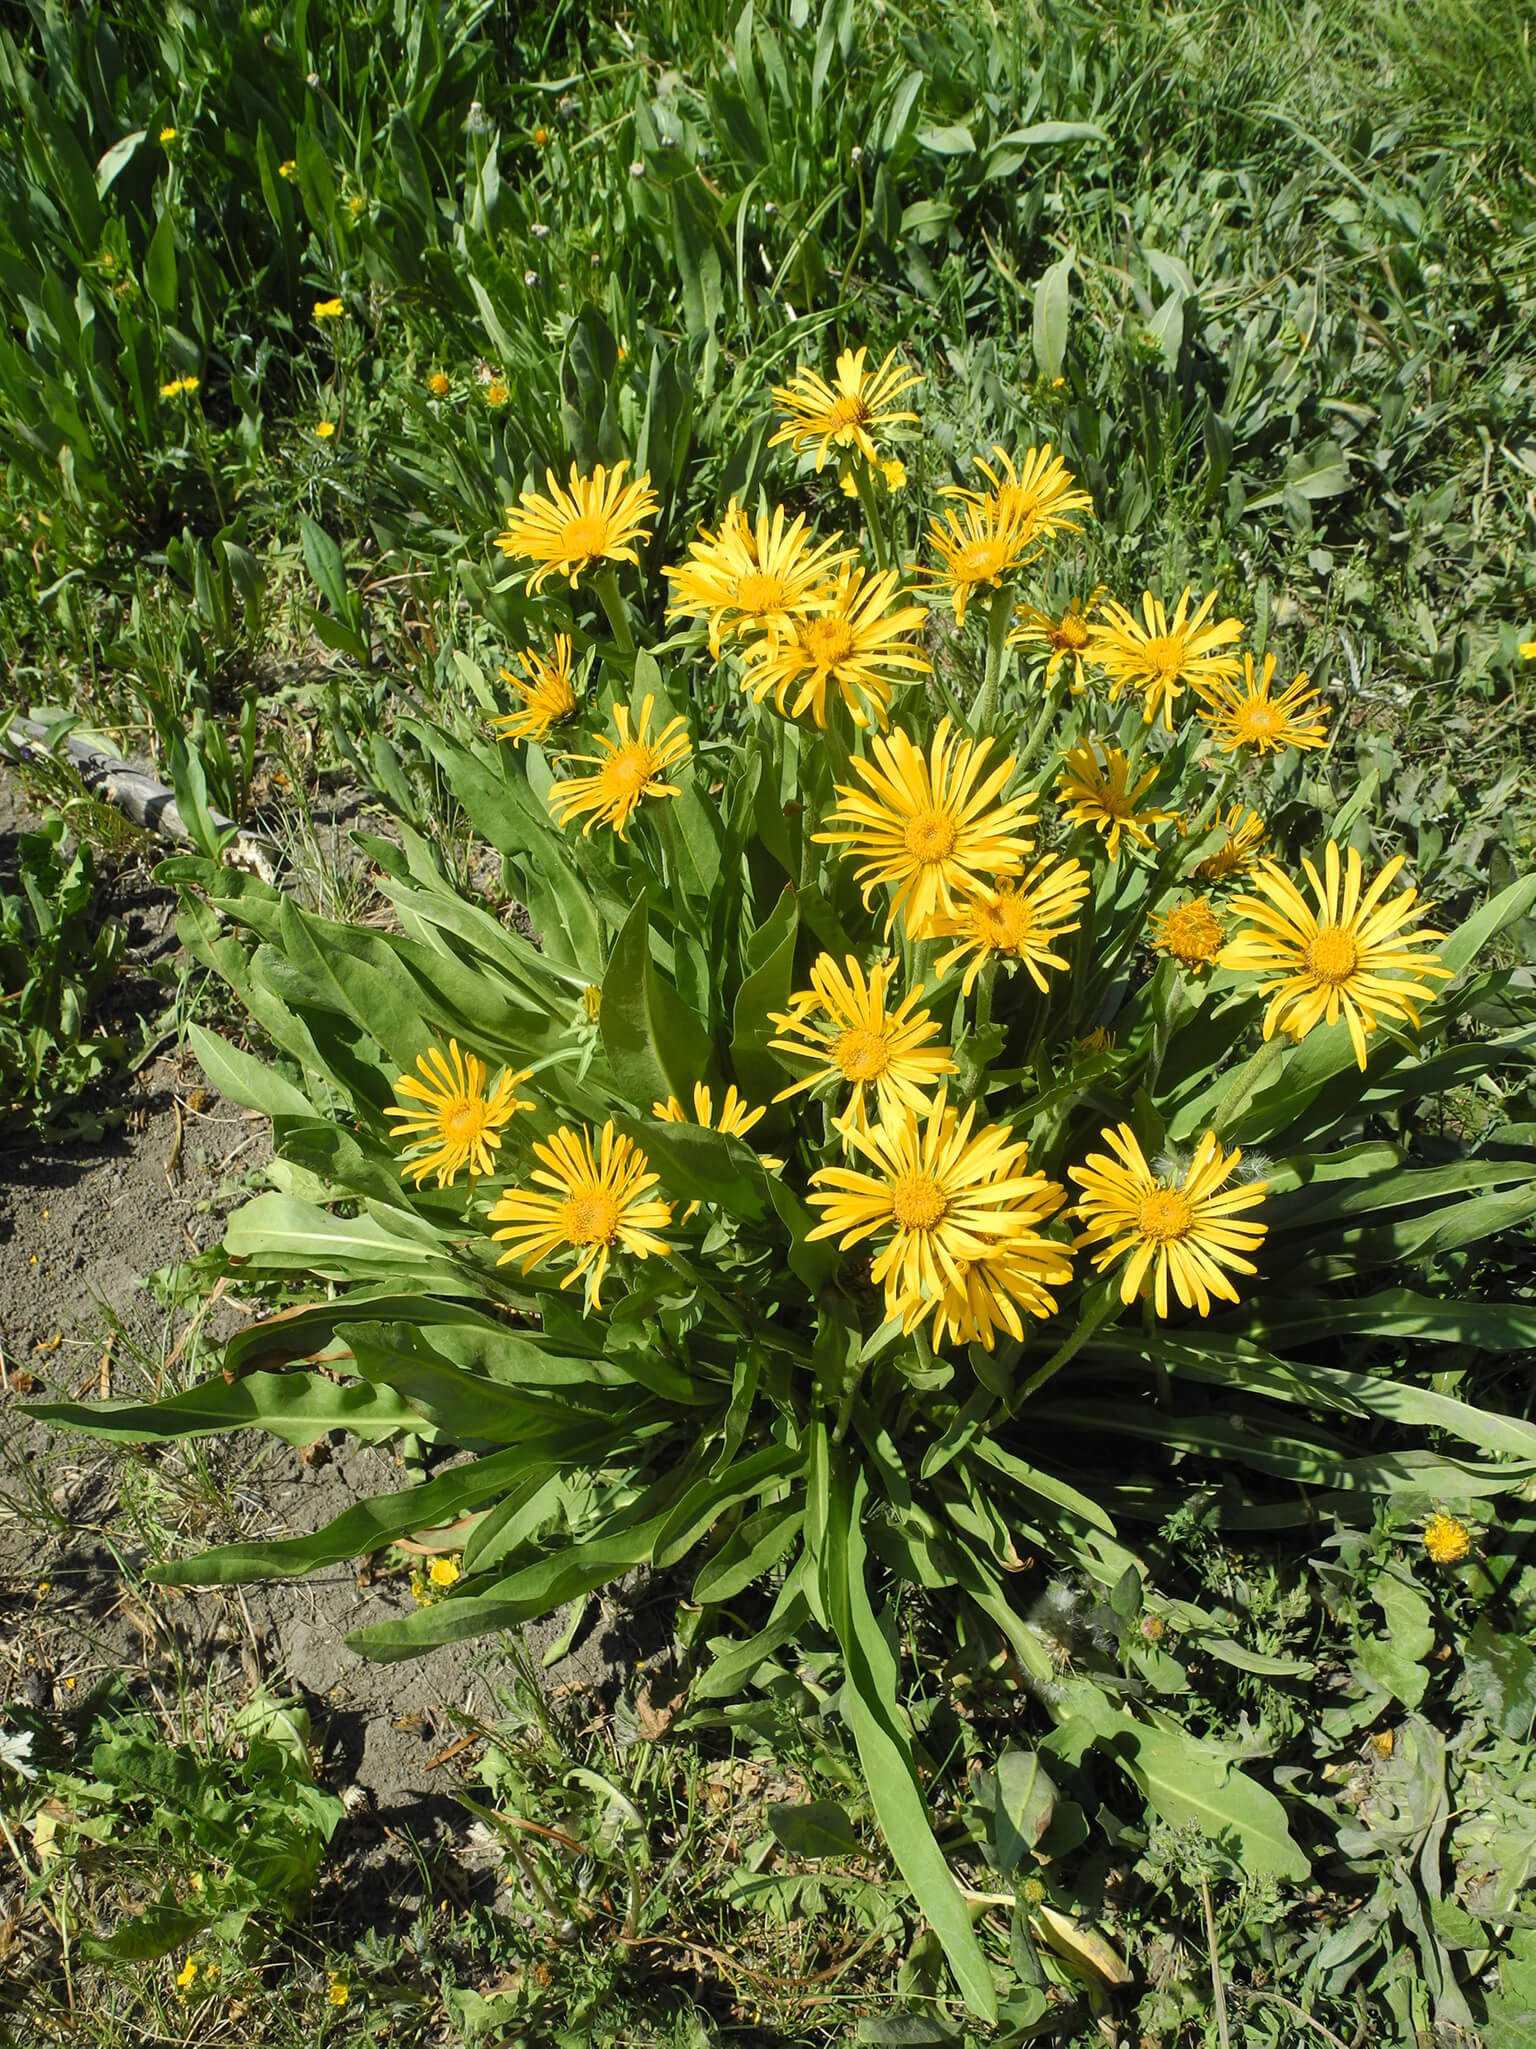 Sneezeweed: their tousled heads look like they just recovered from a violent sneeze.